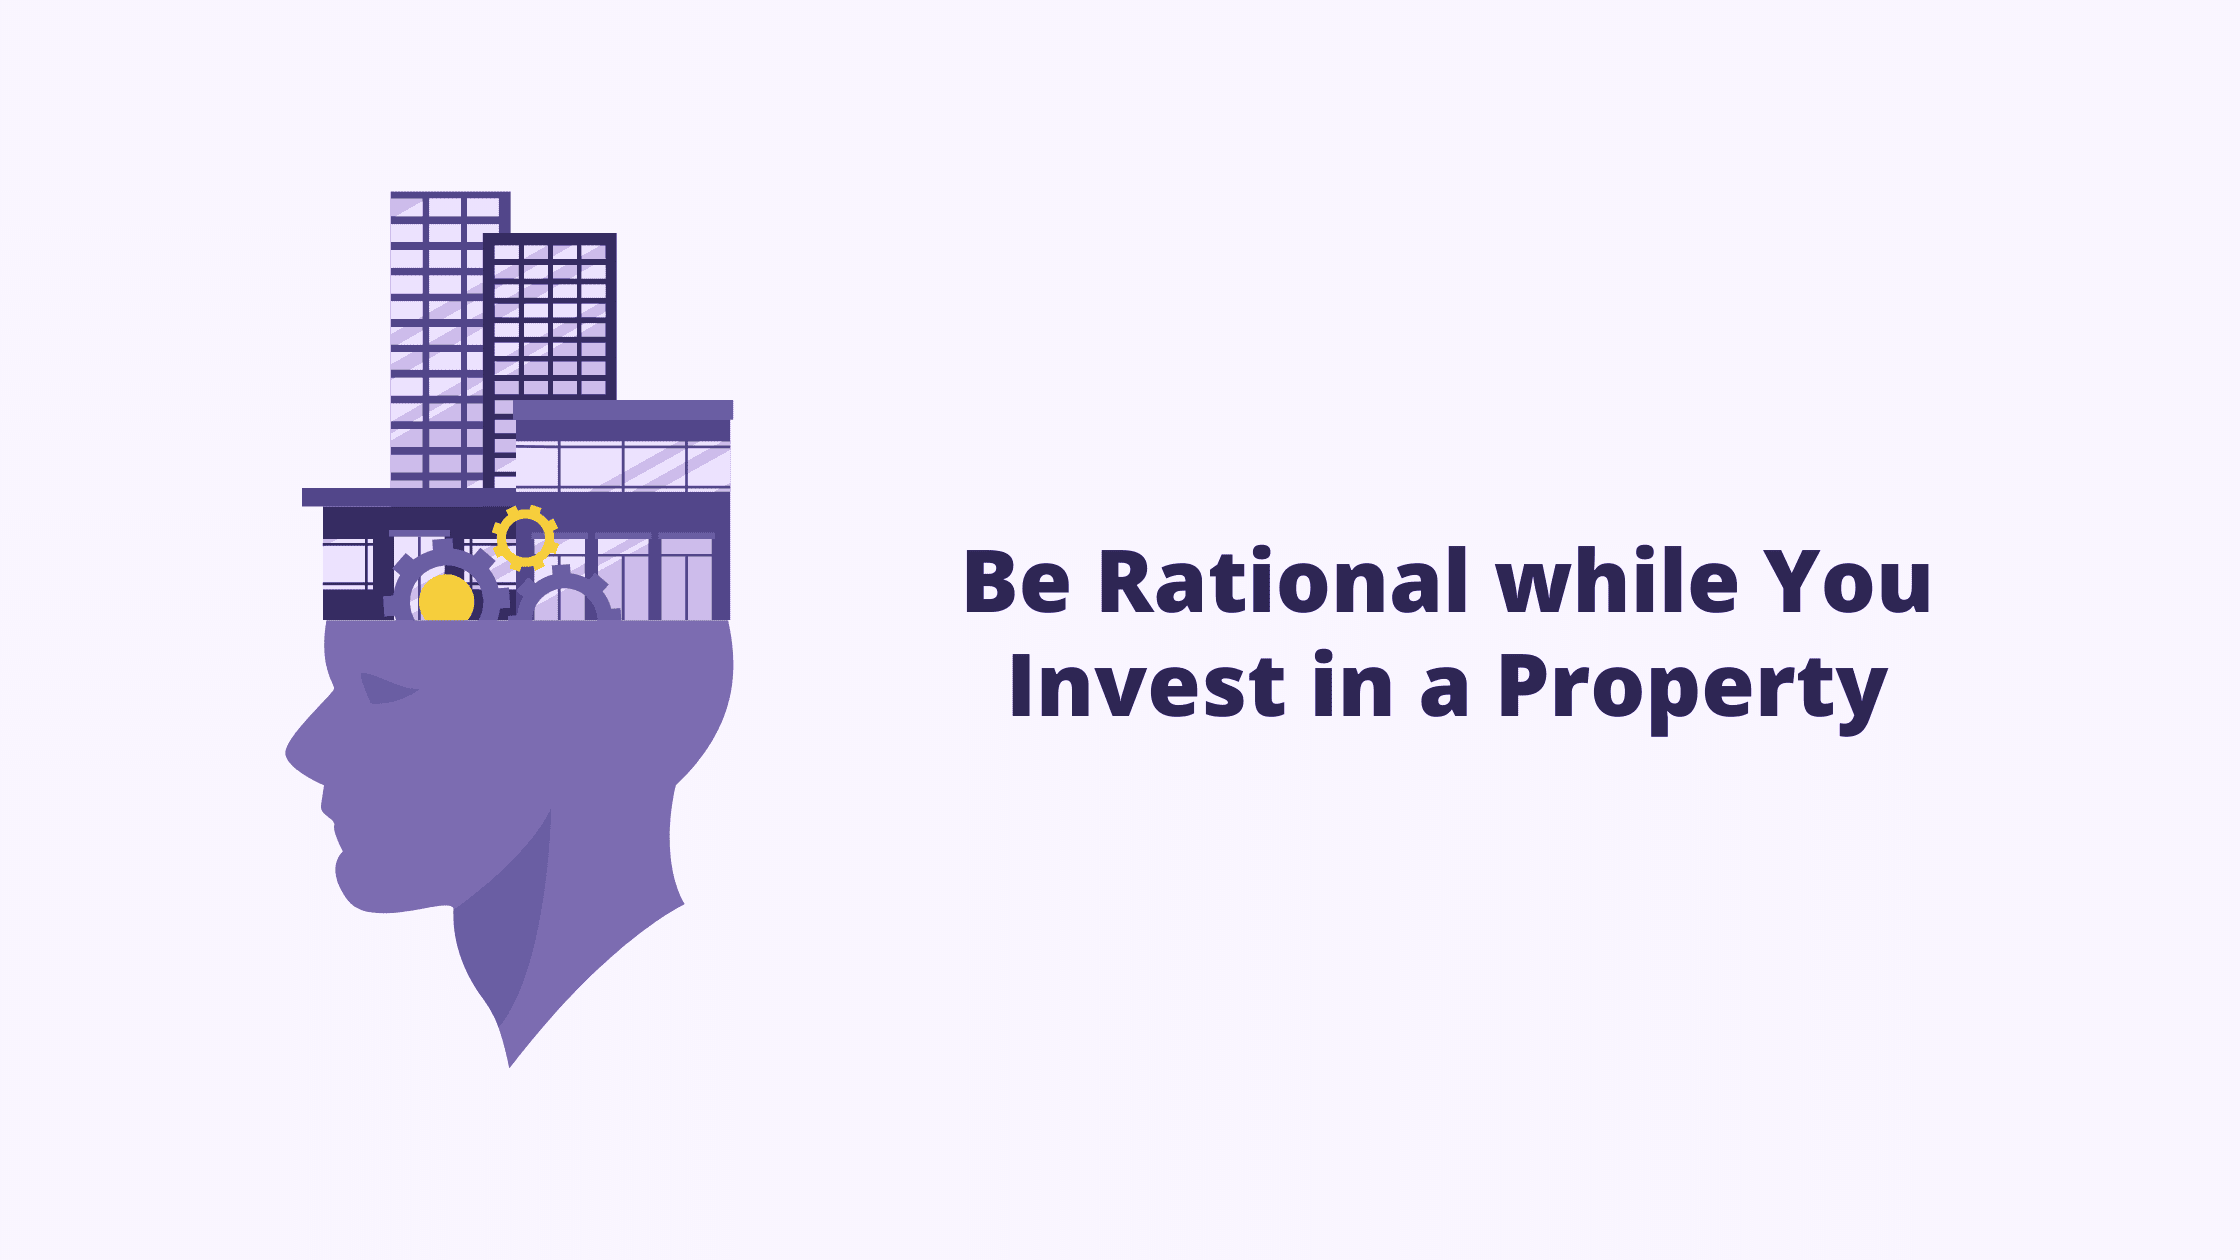 Be Rational While You Invest in a Property